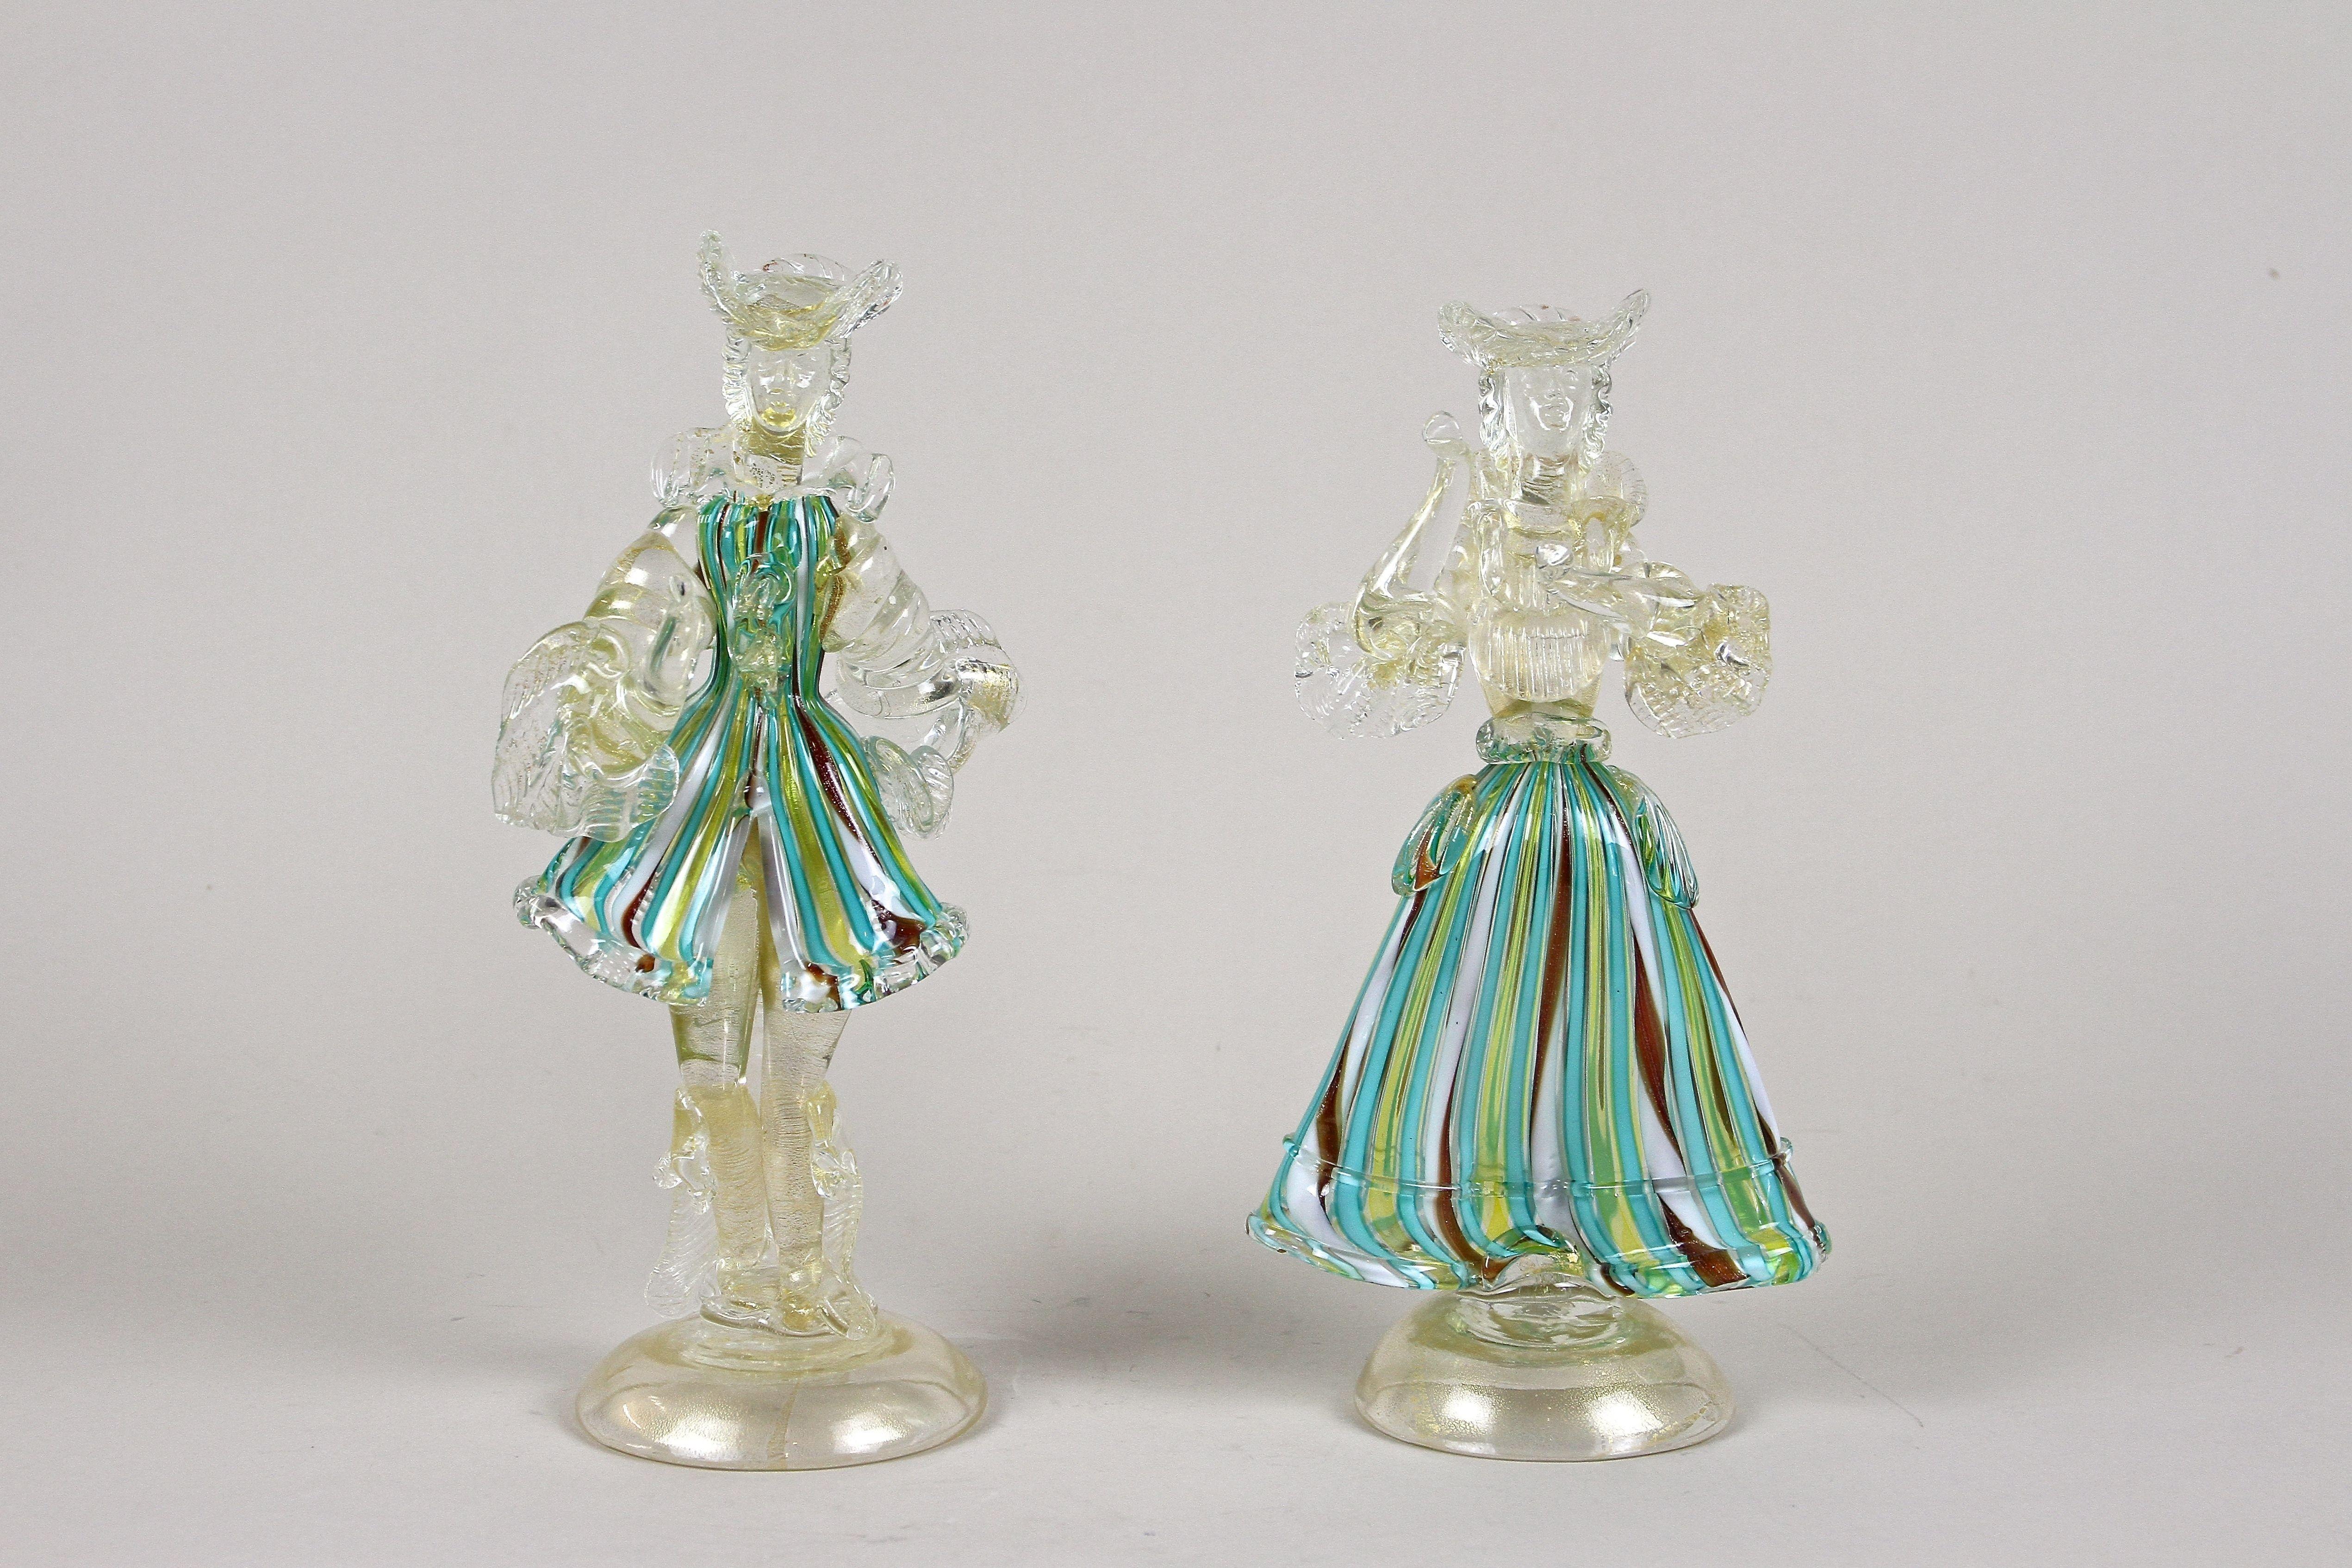 Exceptional pair of fine Murano Glass Figurines from the small island of Murano around 1950. The outstanding crafted figurines show the incredible skills of the famous glass artists at its best. Depicting a couple in a beautiful Venetian festive